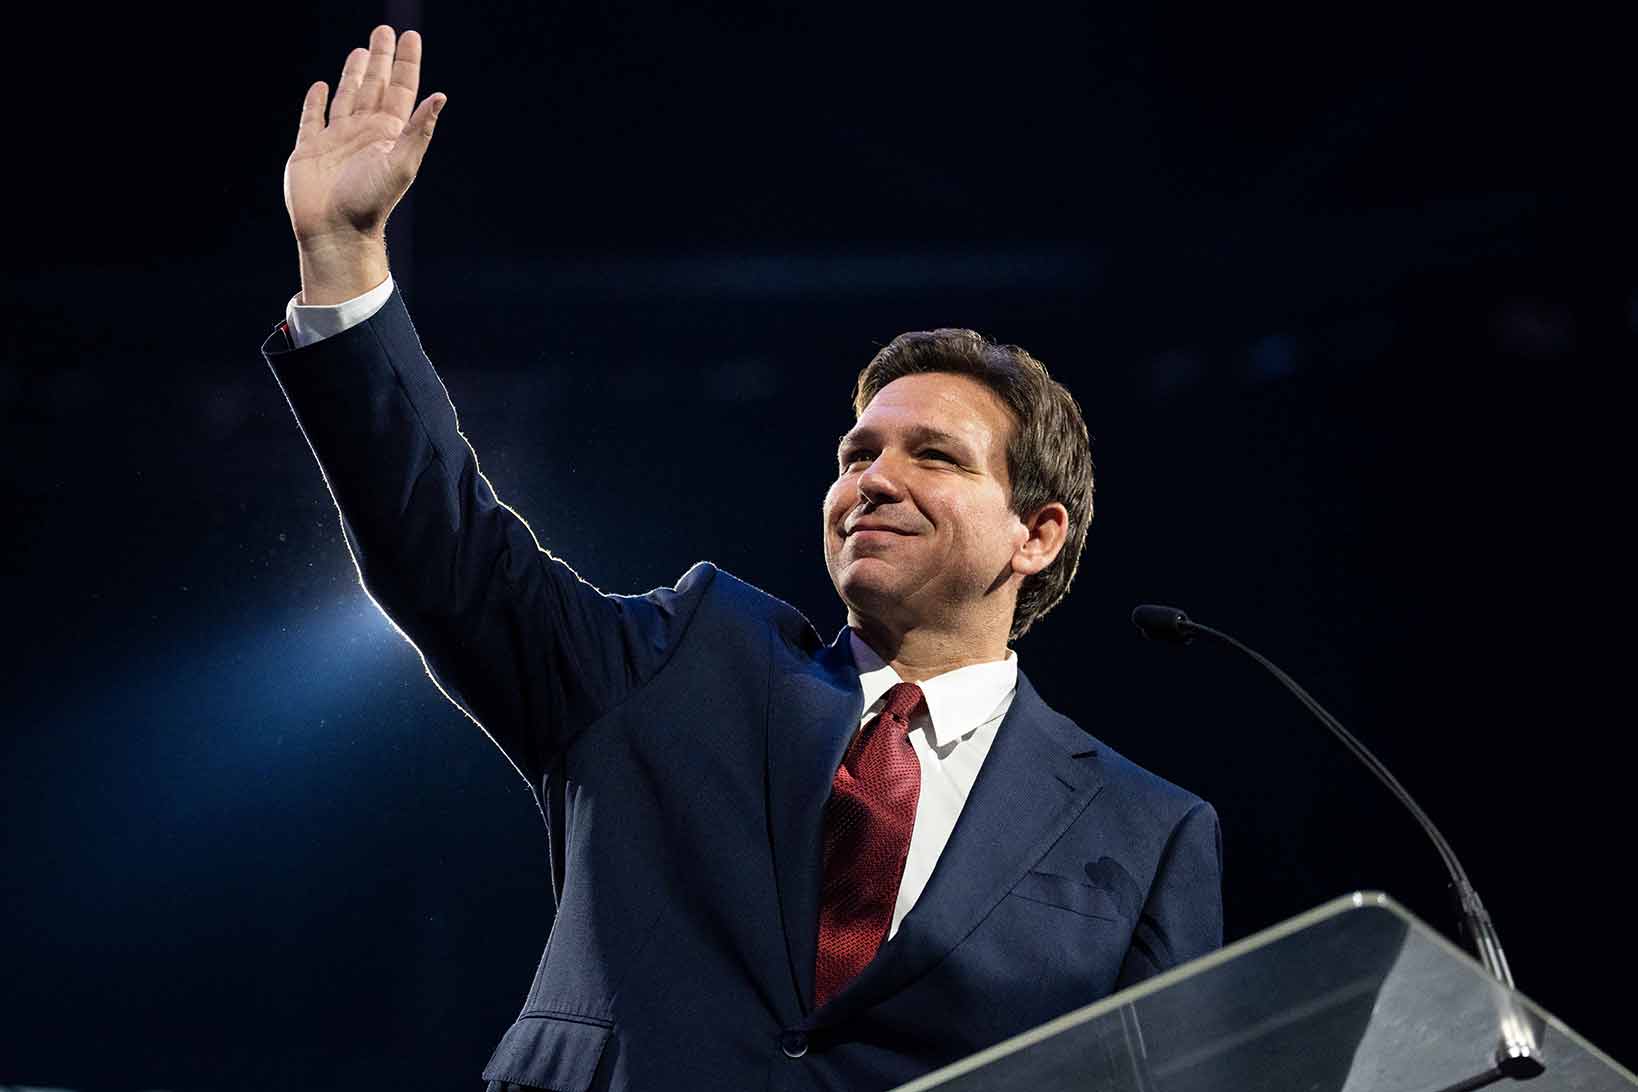 Florida's governor, Ron DeSantis has announced his bid for the Republican presidential nomination. DeSantis made the announcement during a scheduled Twitter Spaces conversation with Elon Musk, the CEO of Twitter.